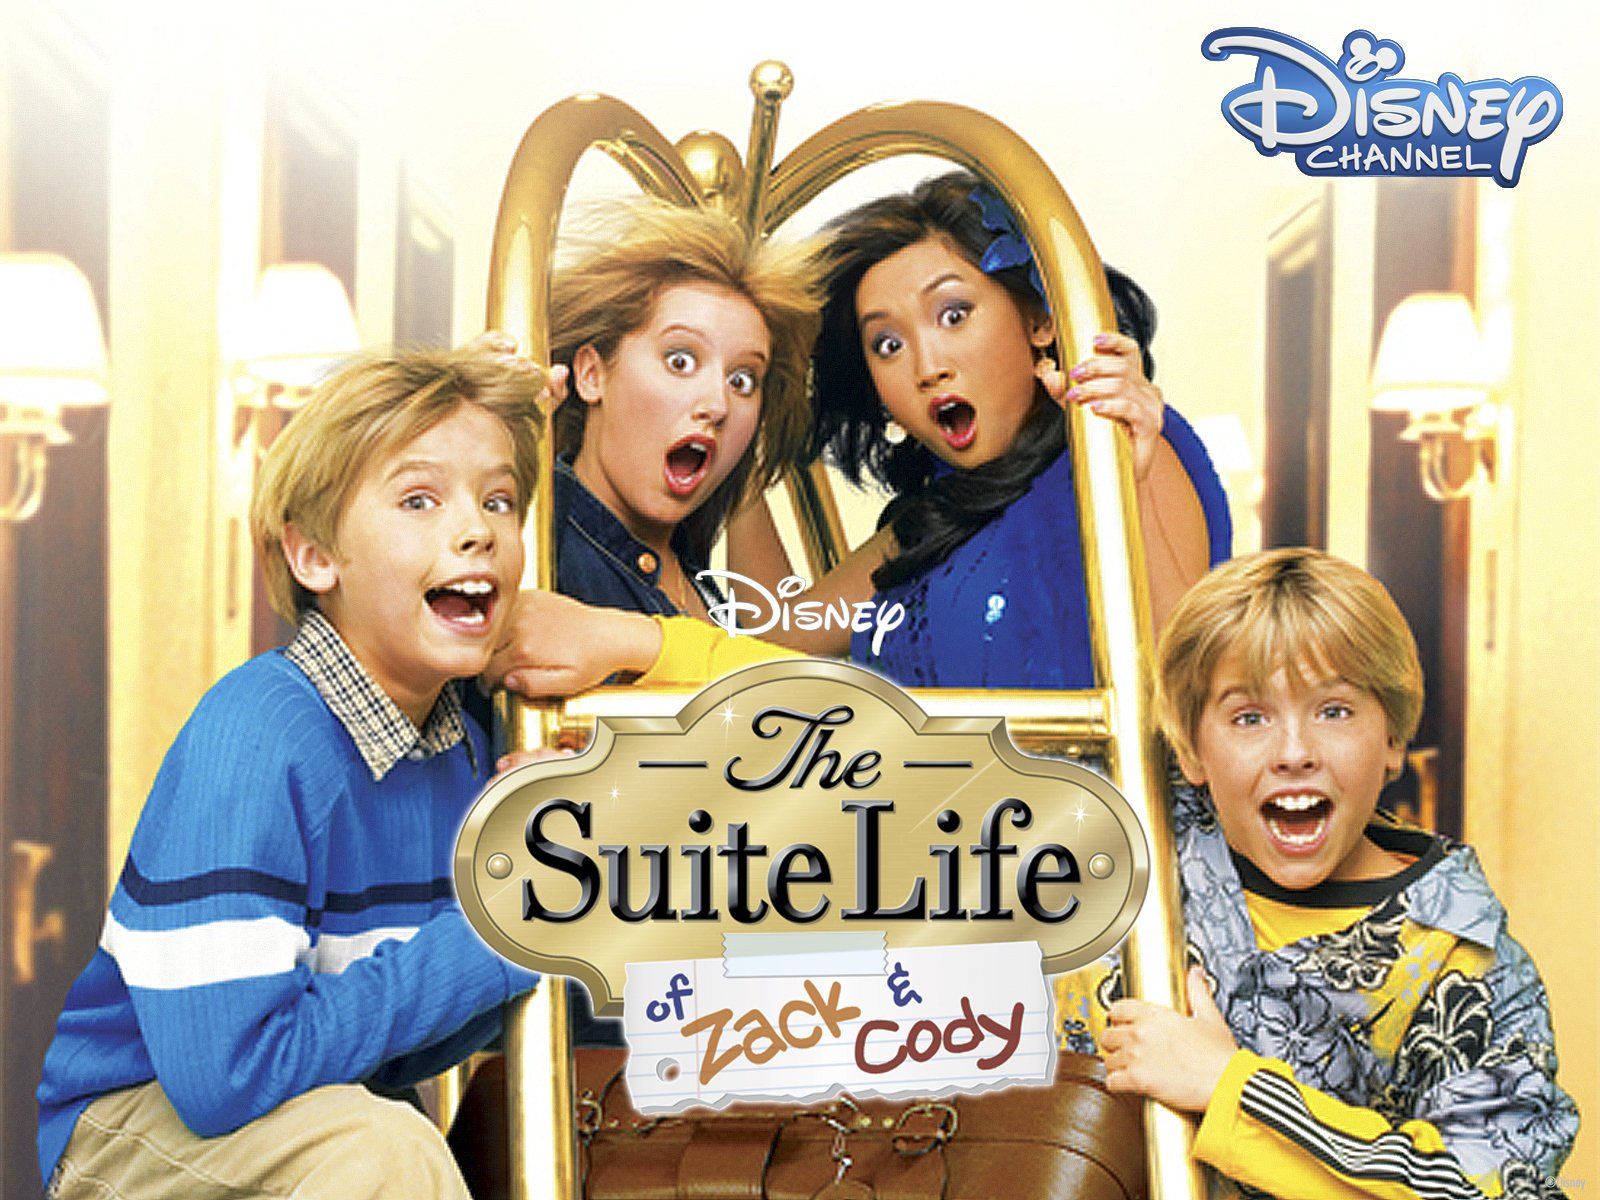 Watch The Suite Life of Zack & Cody Volume 1